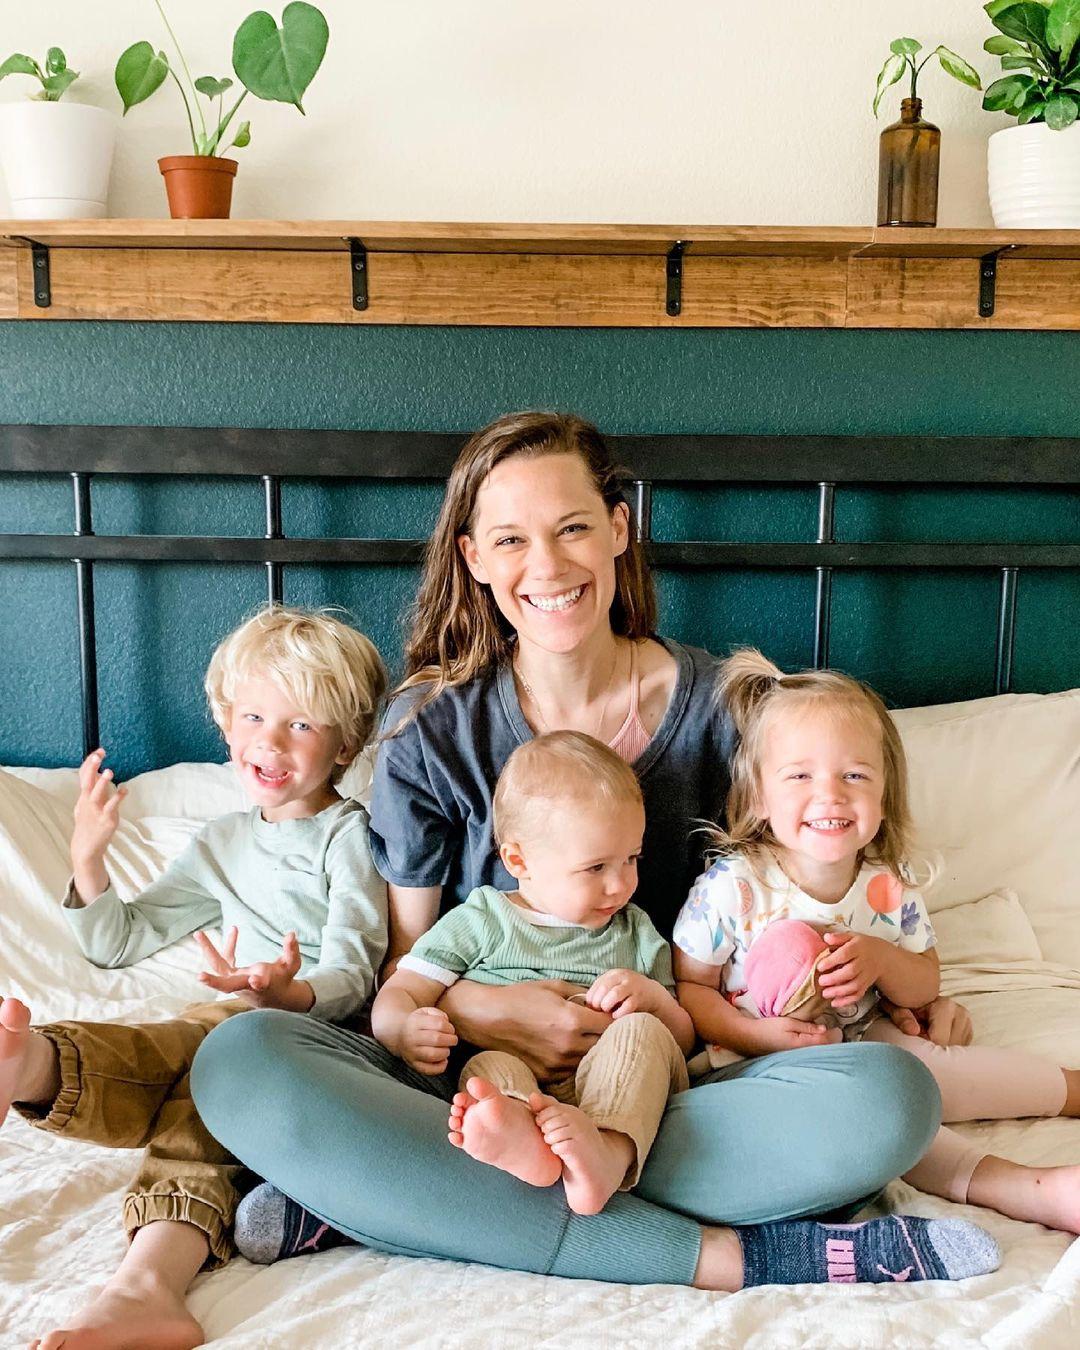 Tessie with her three children: daughter Nell, and two sons Hart (L) and Whit. (Courtesy of <a href="https://www.instagram.com/tessieheeter/">Tessie Heeter</a>)